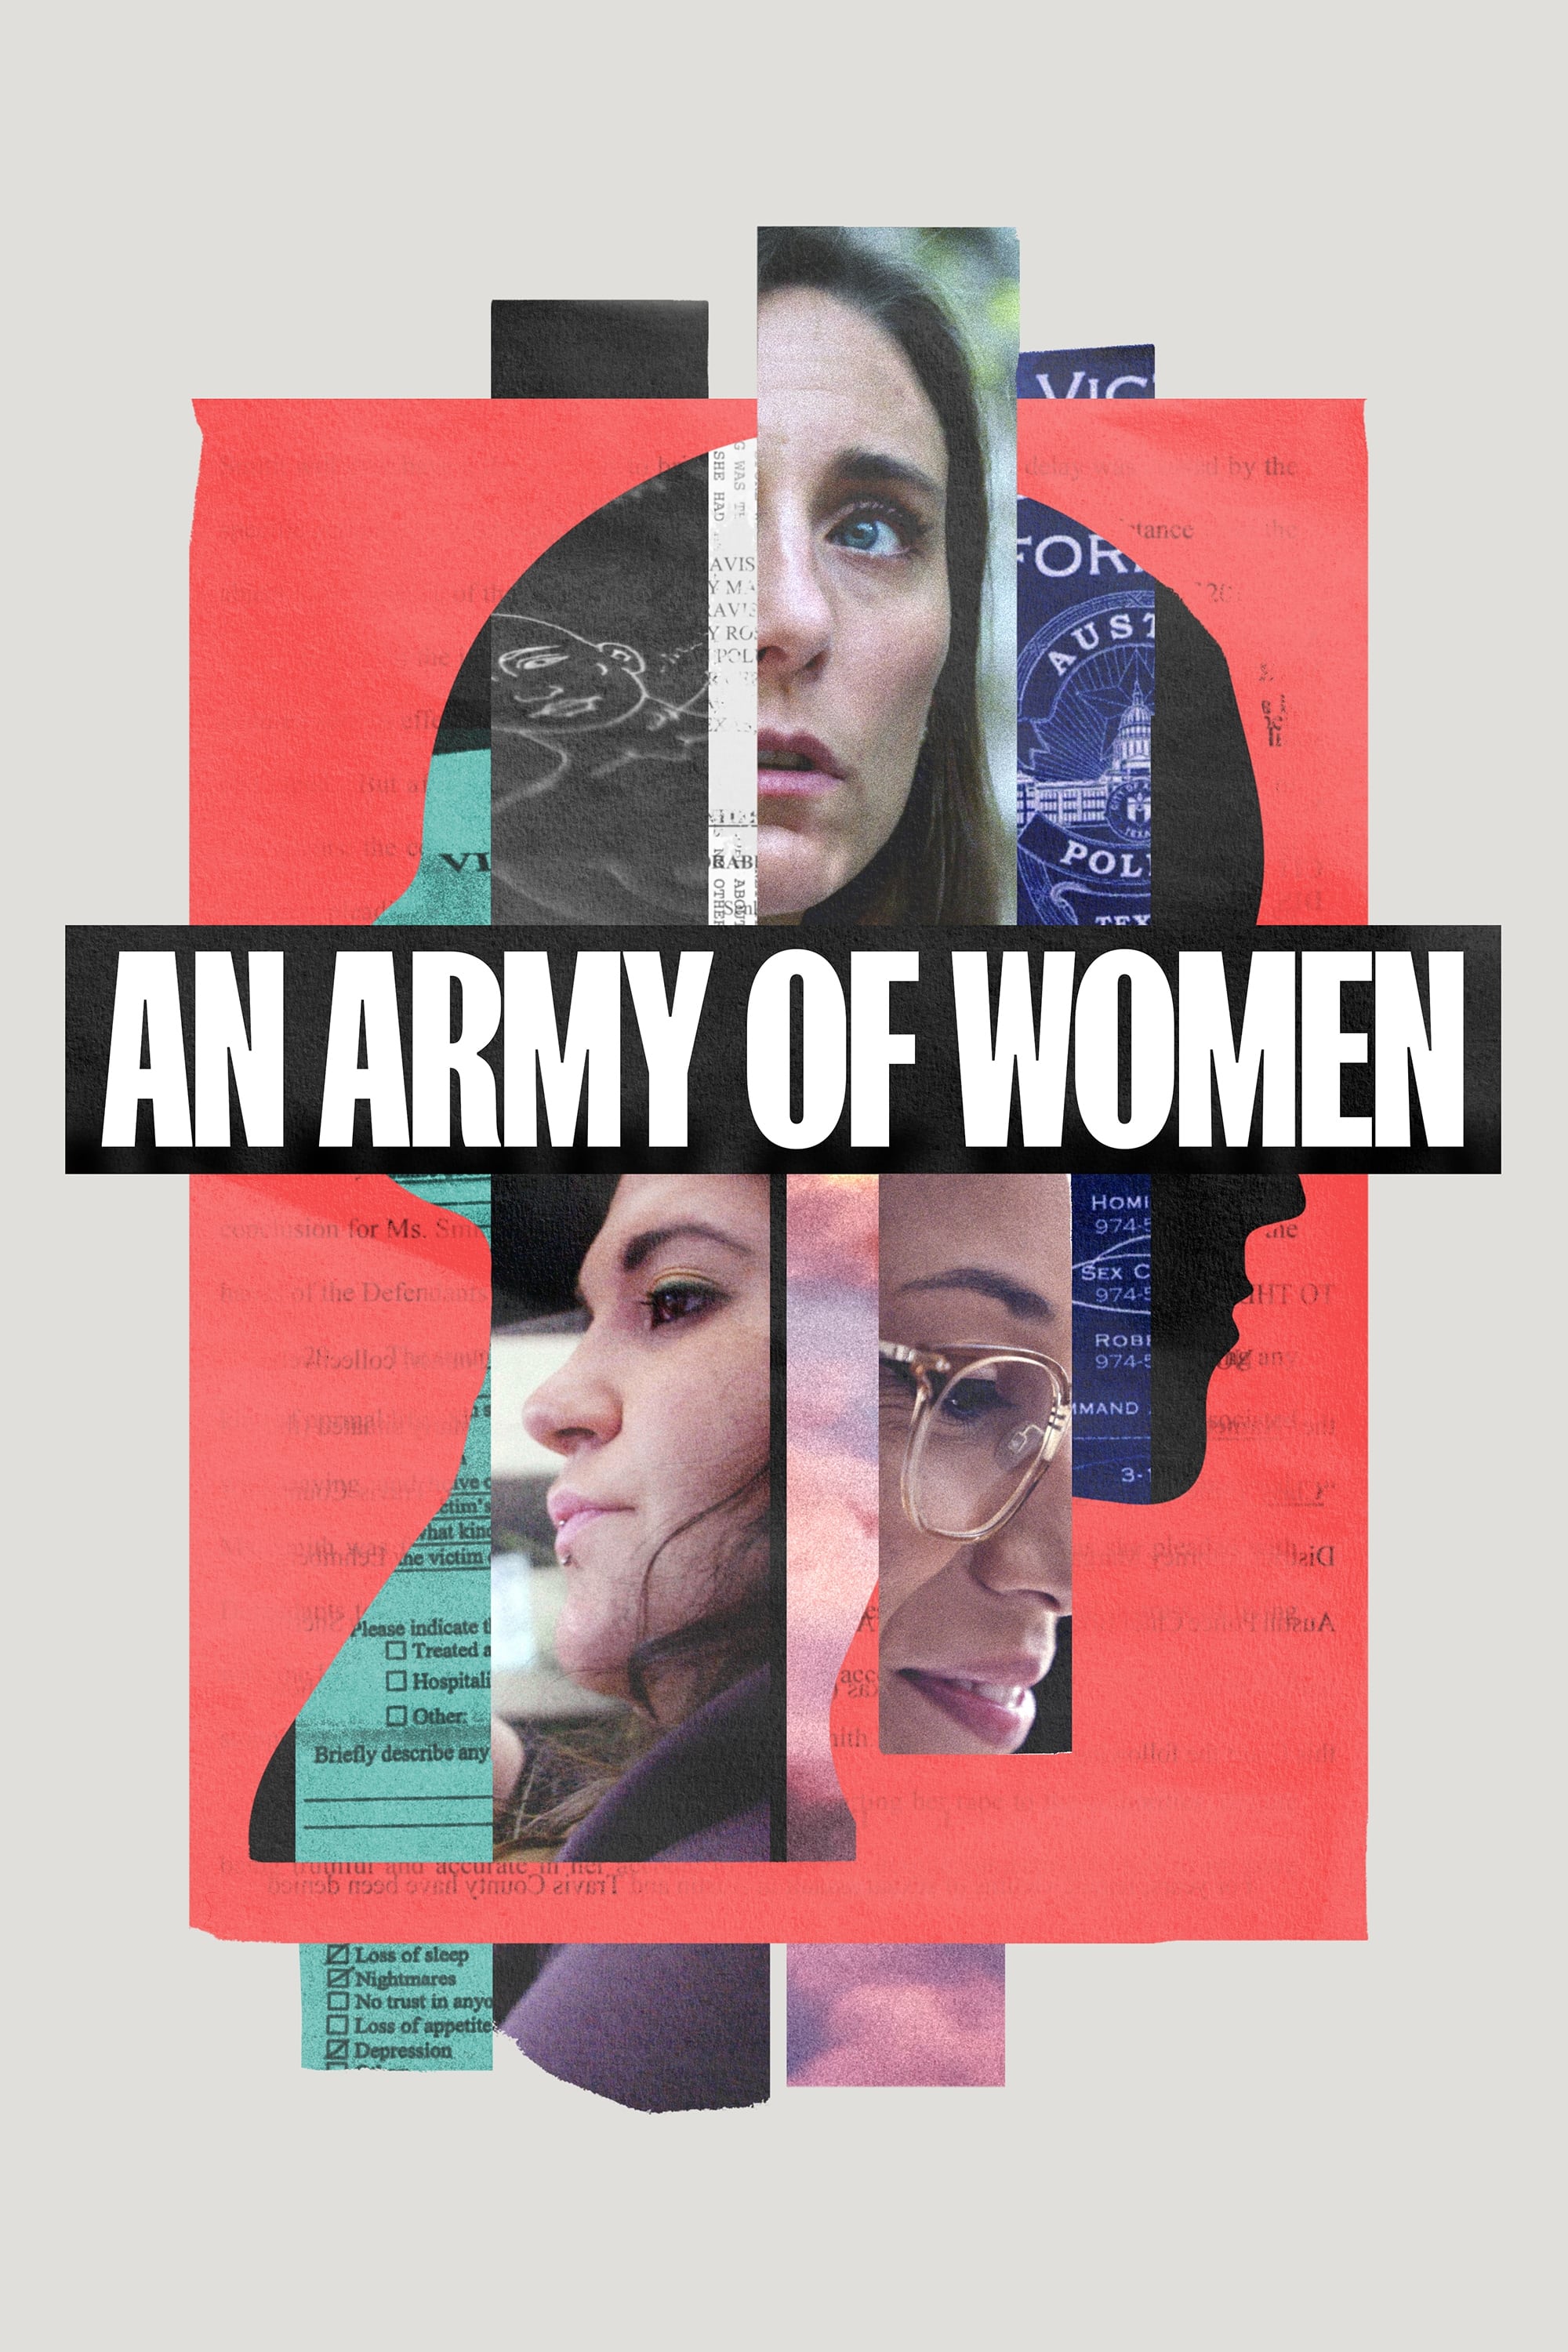 An Army of Women